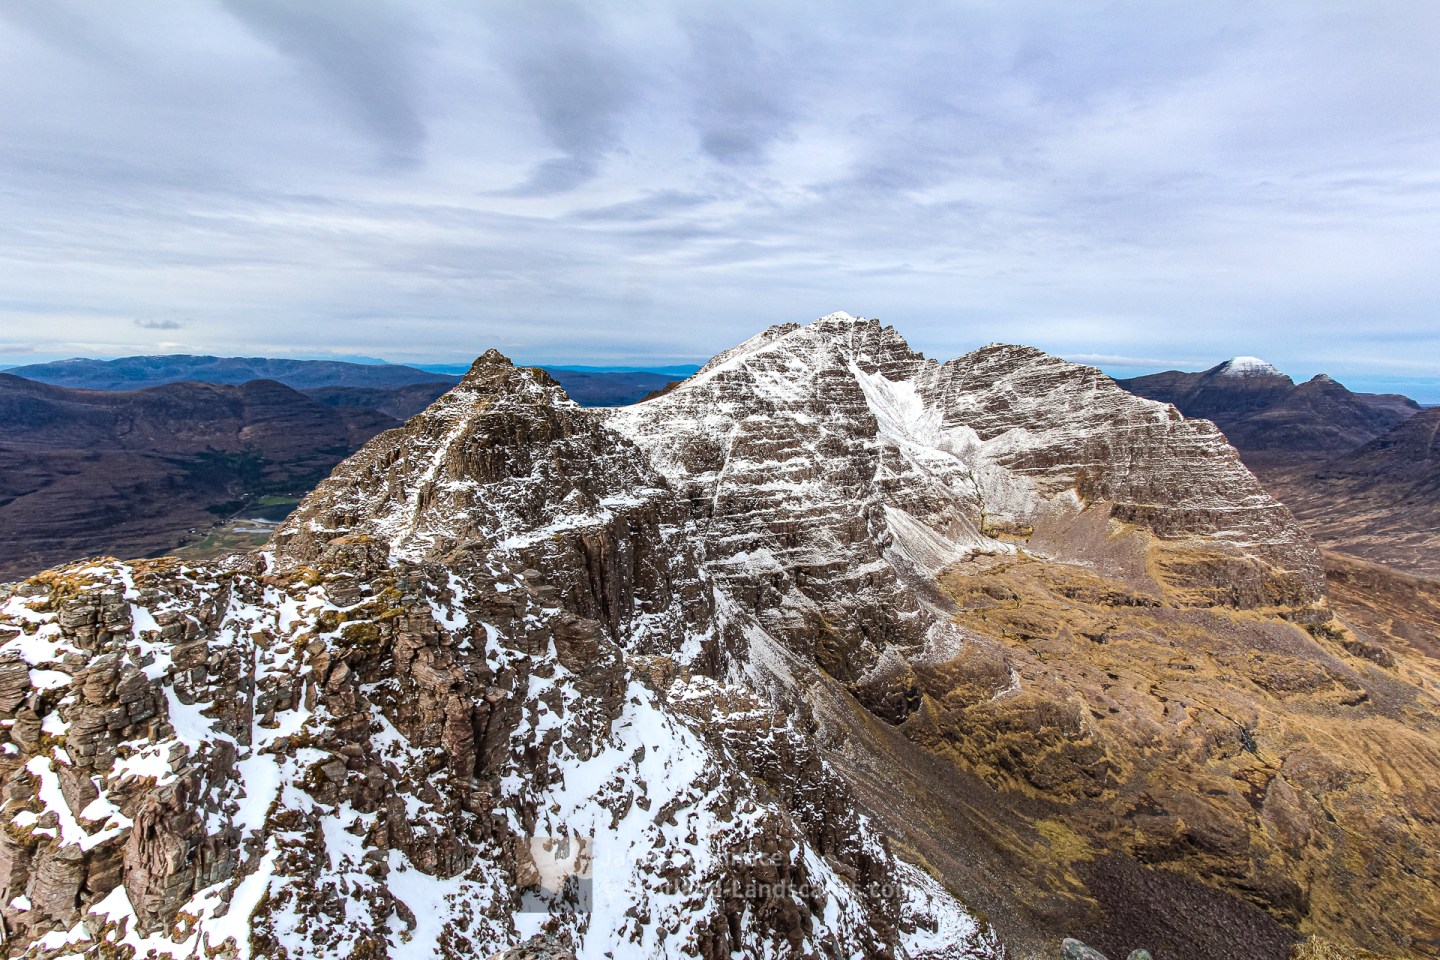 Photo of Am Fasarinen, Mullach an Rathain, the Northern Pinnacles and Meall Dearg from the east end of the Fasarinen pinnacles, Liathach